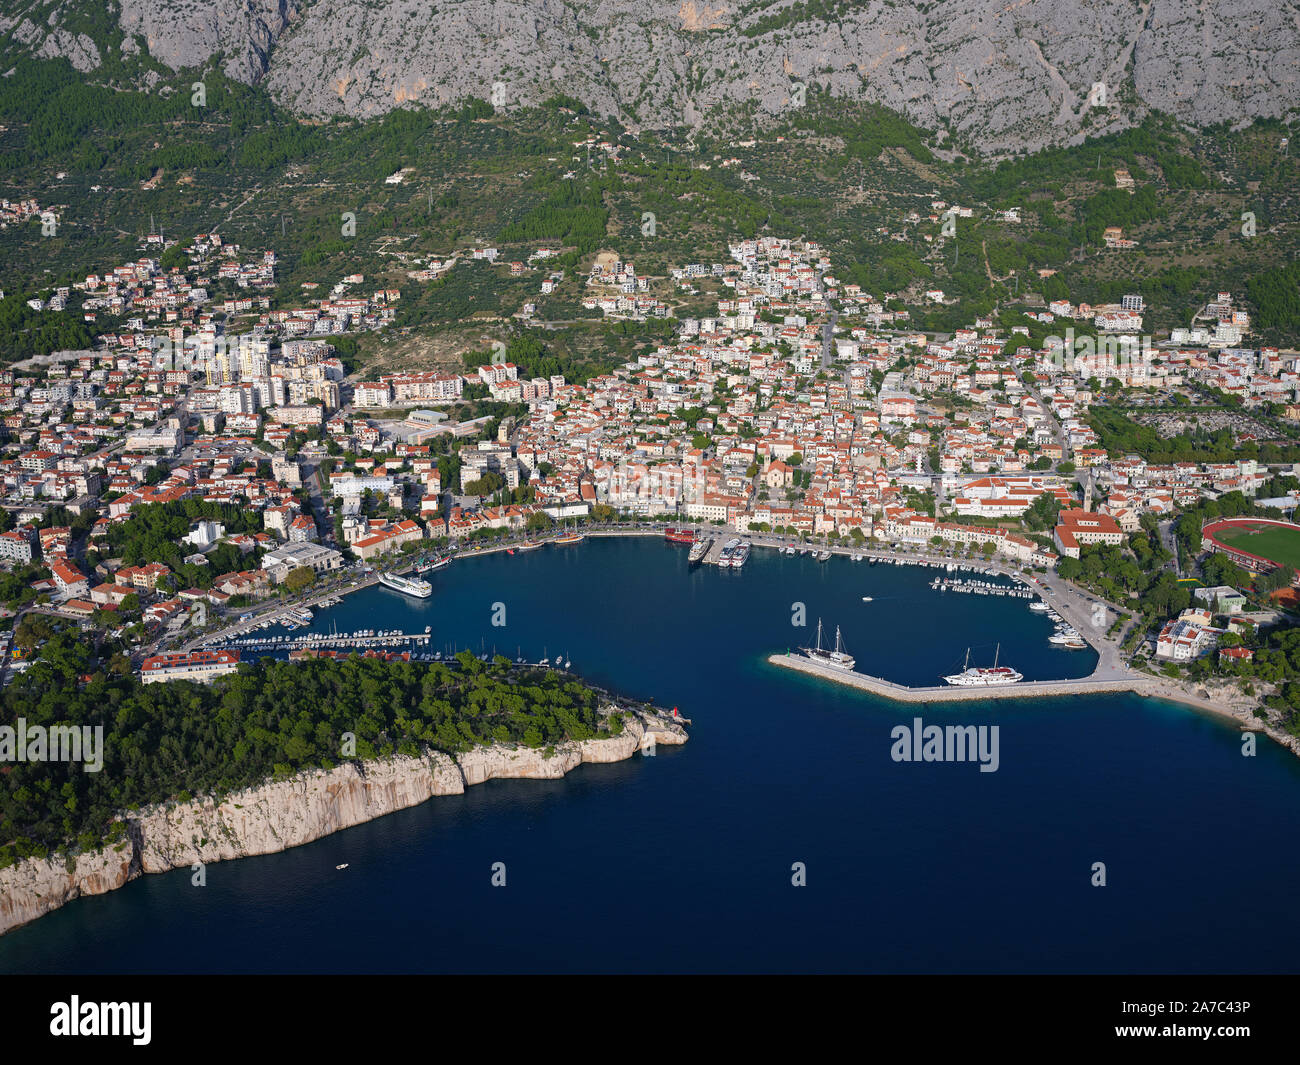 AERIAL VIEW. Picturesque seaside resort with its sheltered rocky bay. Makarska, Dalmatia, Croatia. Stock Photo